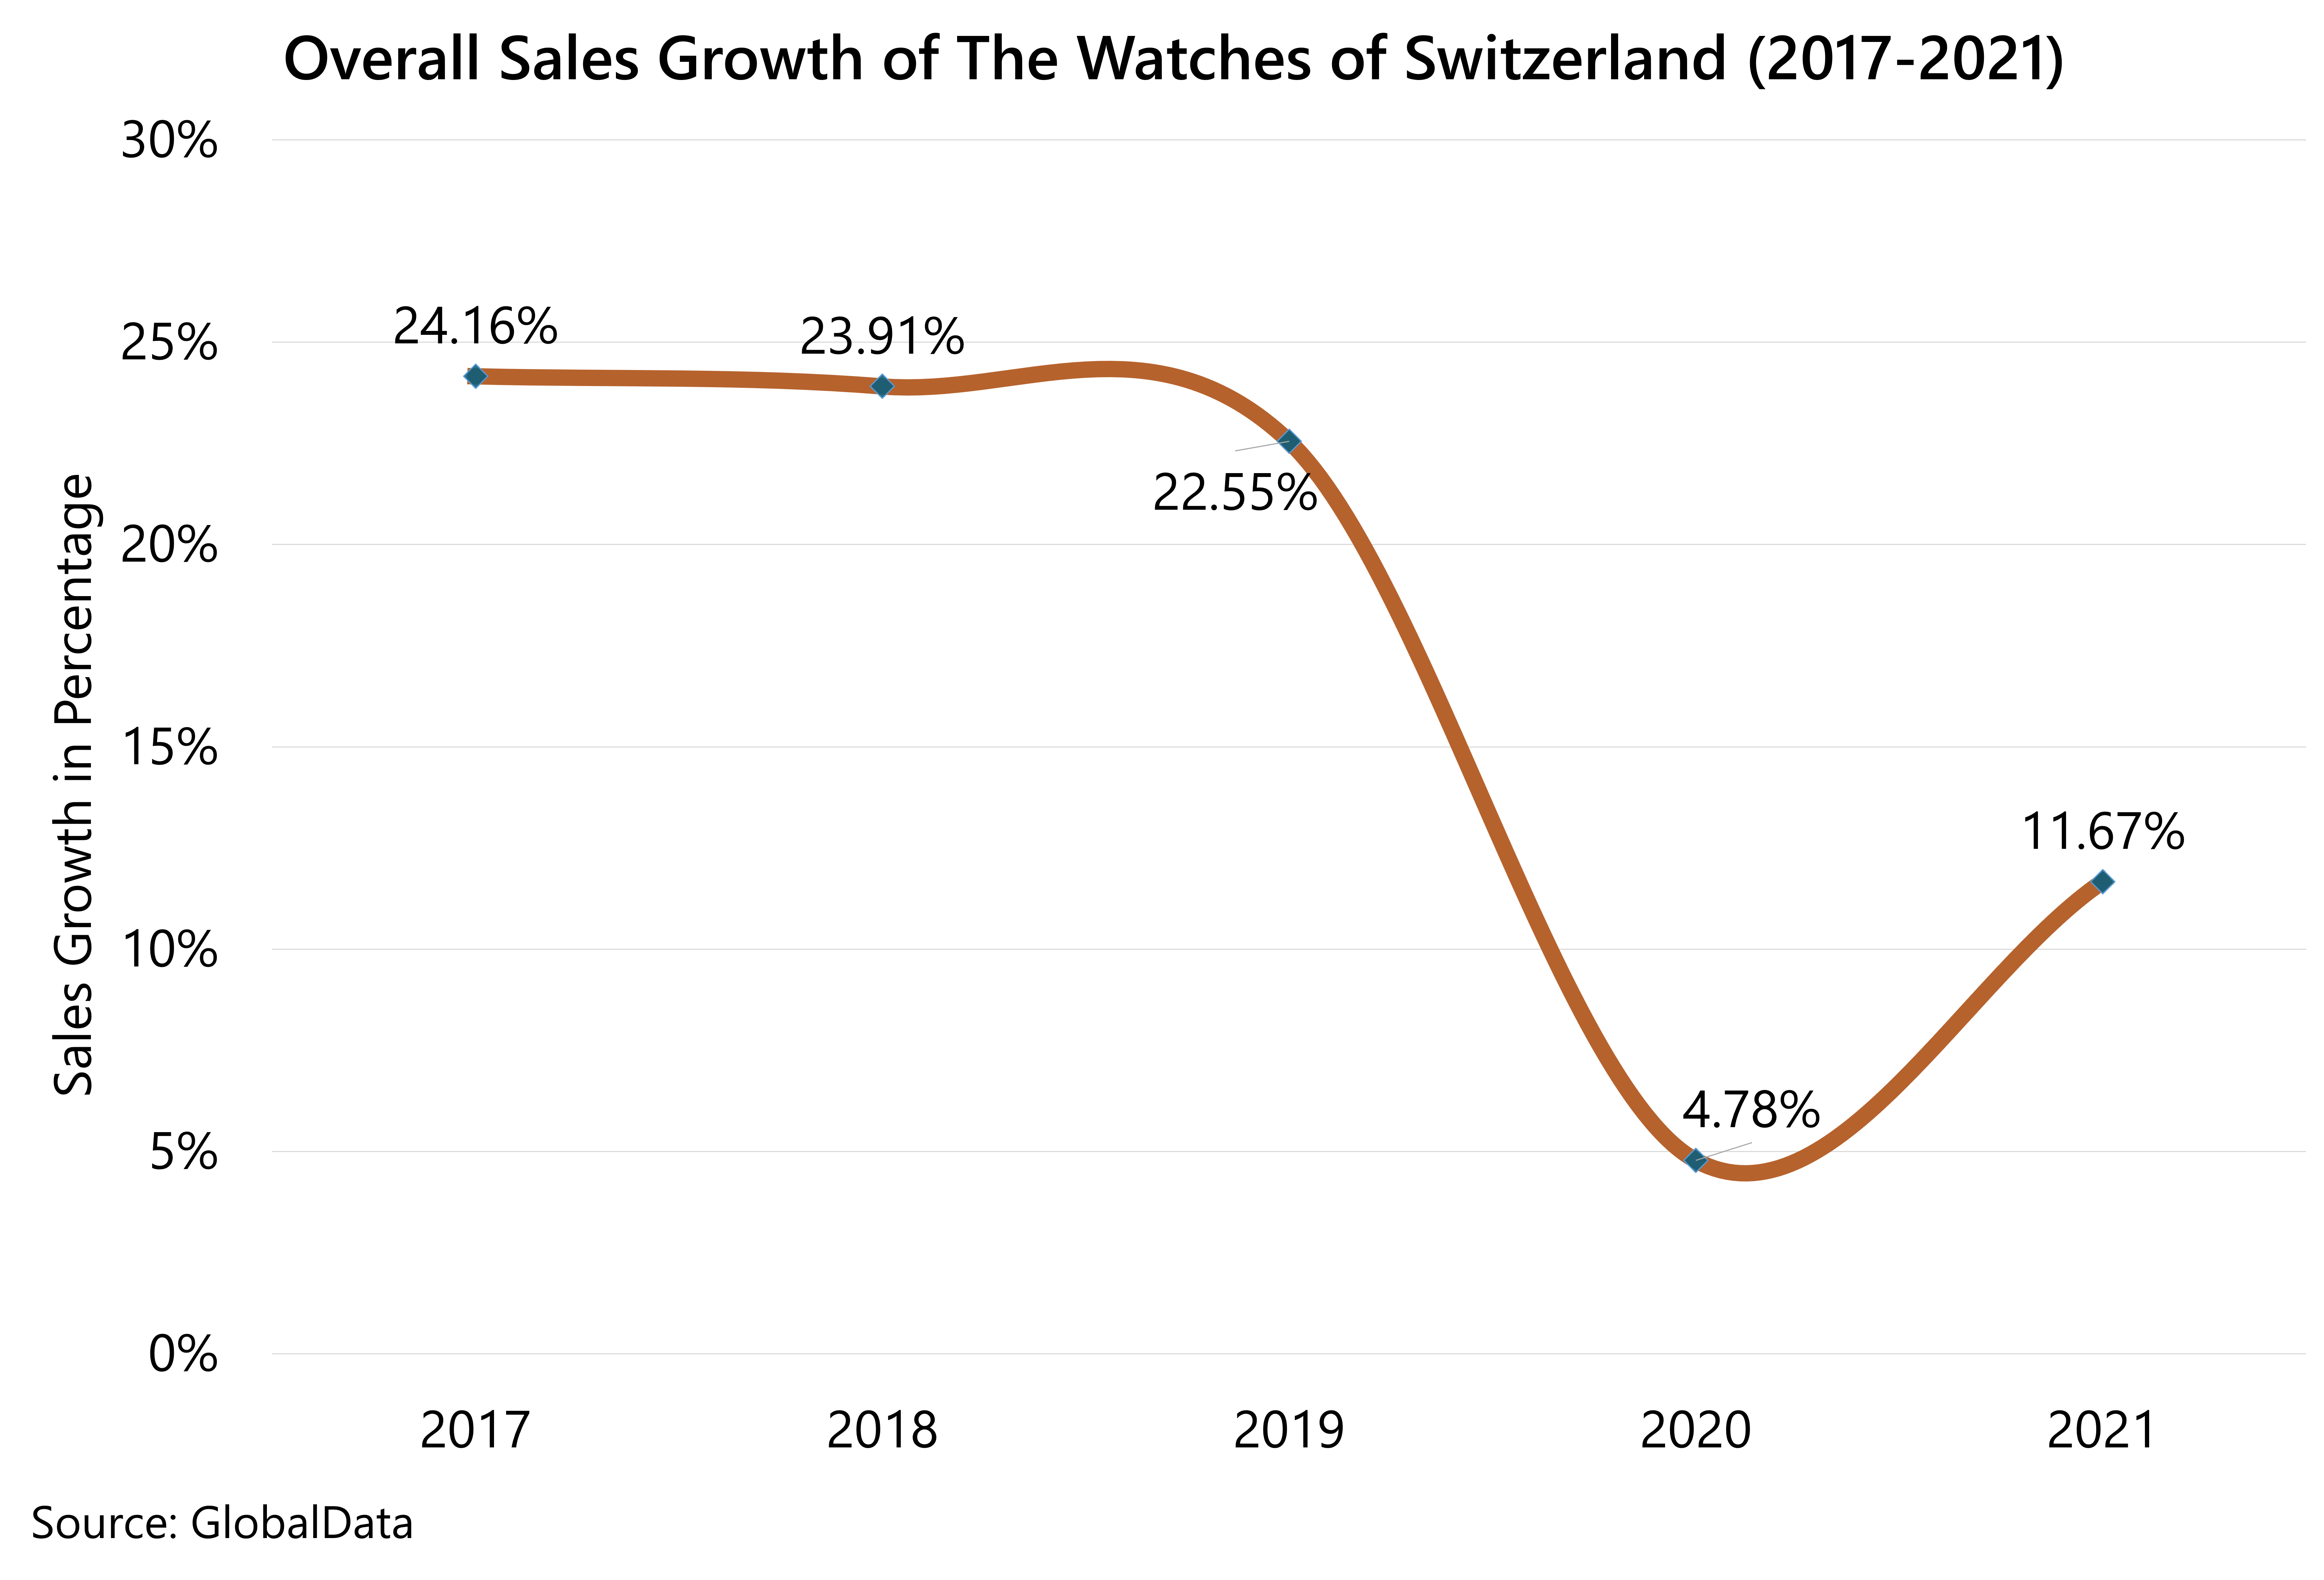 This chart shows the total sales growth of the Watches of Switzerland group. Post-pandemic, the brand hit 11.67% sales growth